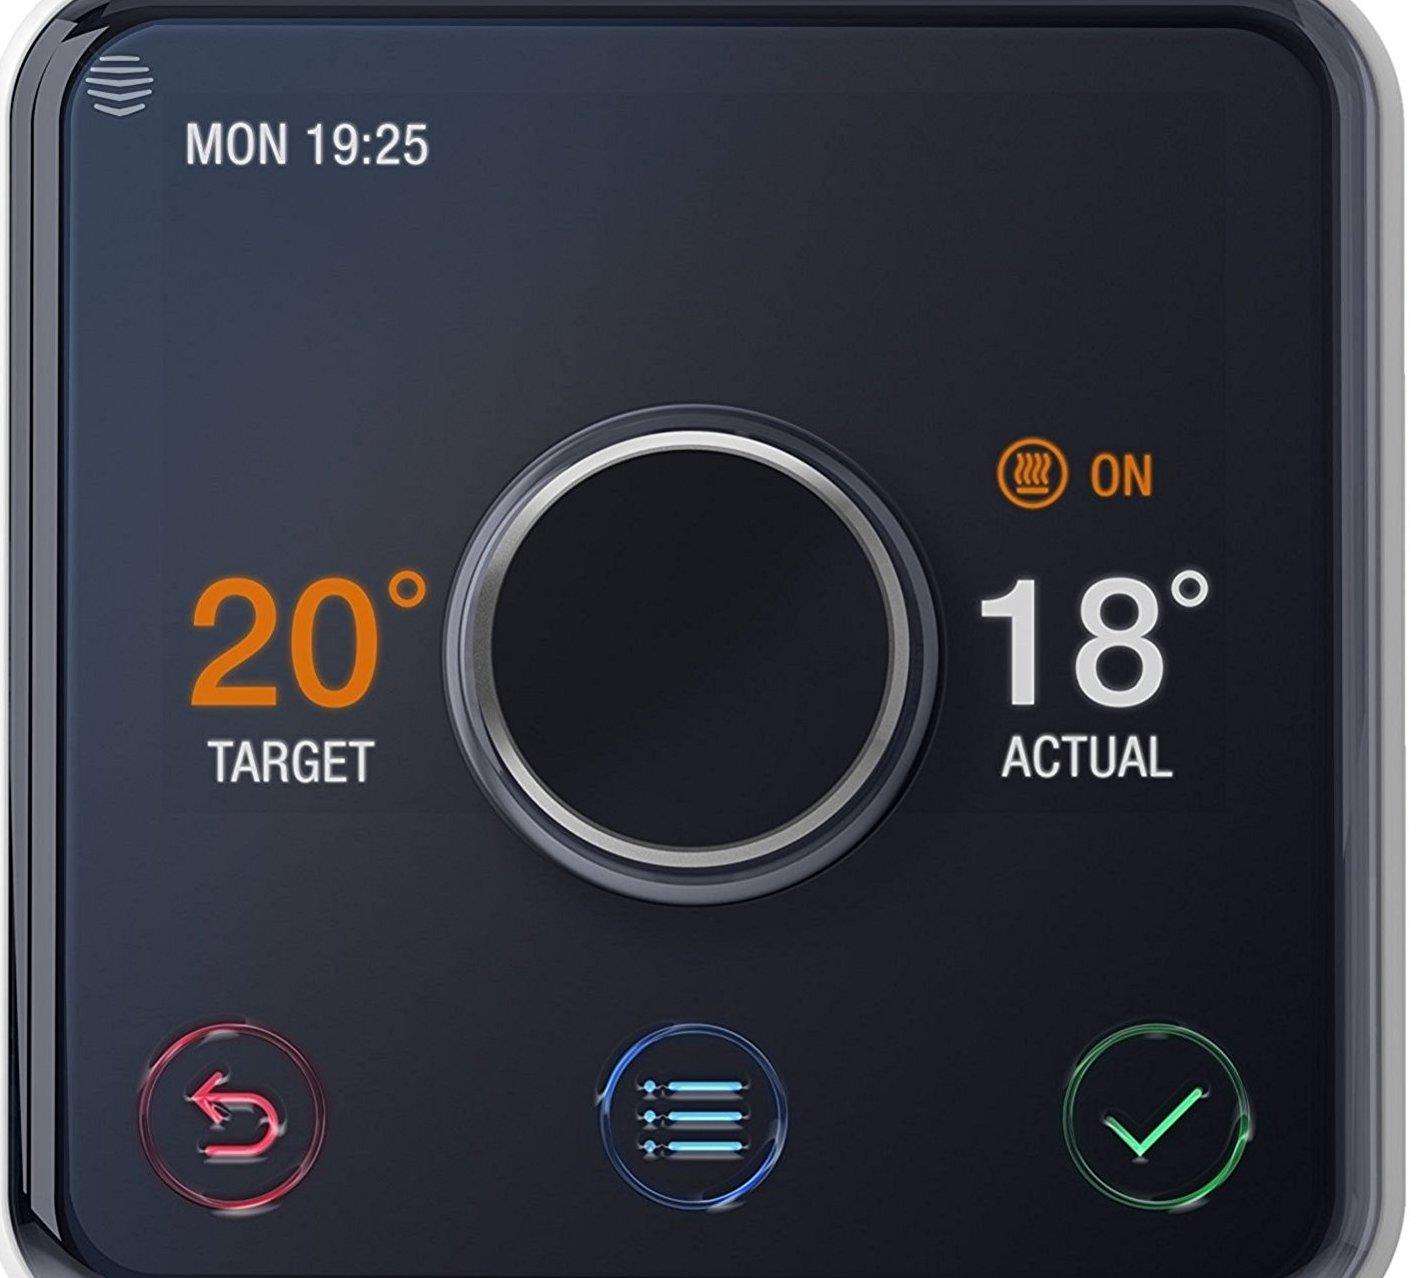 The Hive Active Heating and Hot Water Thermostat was a popular choice for bargain hunters